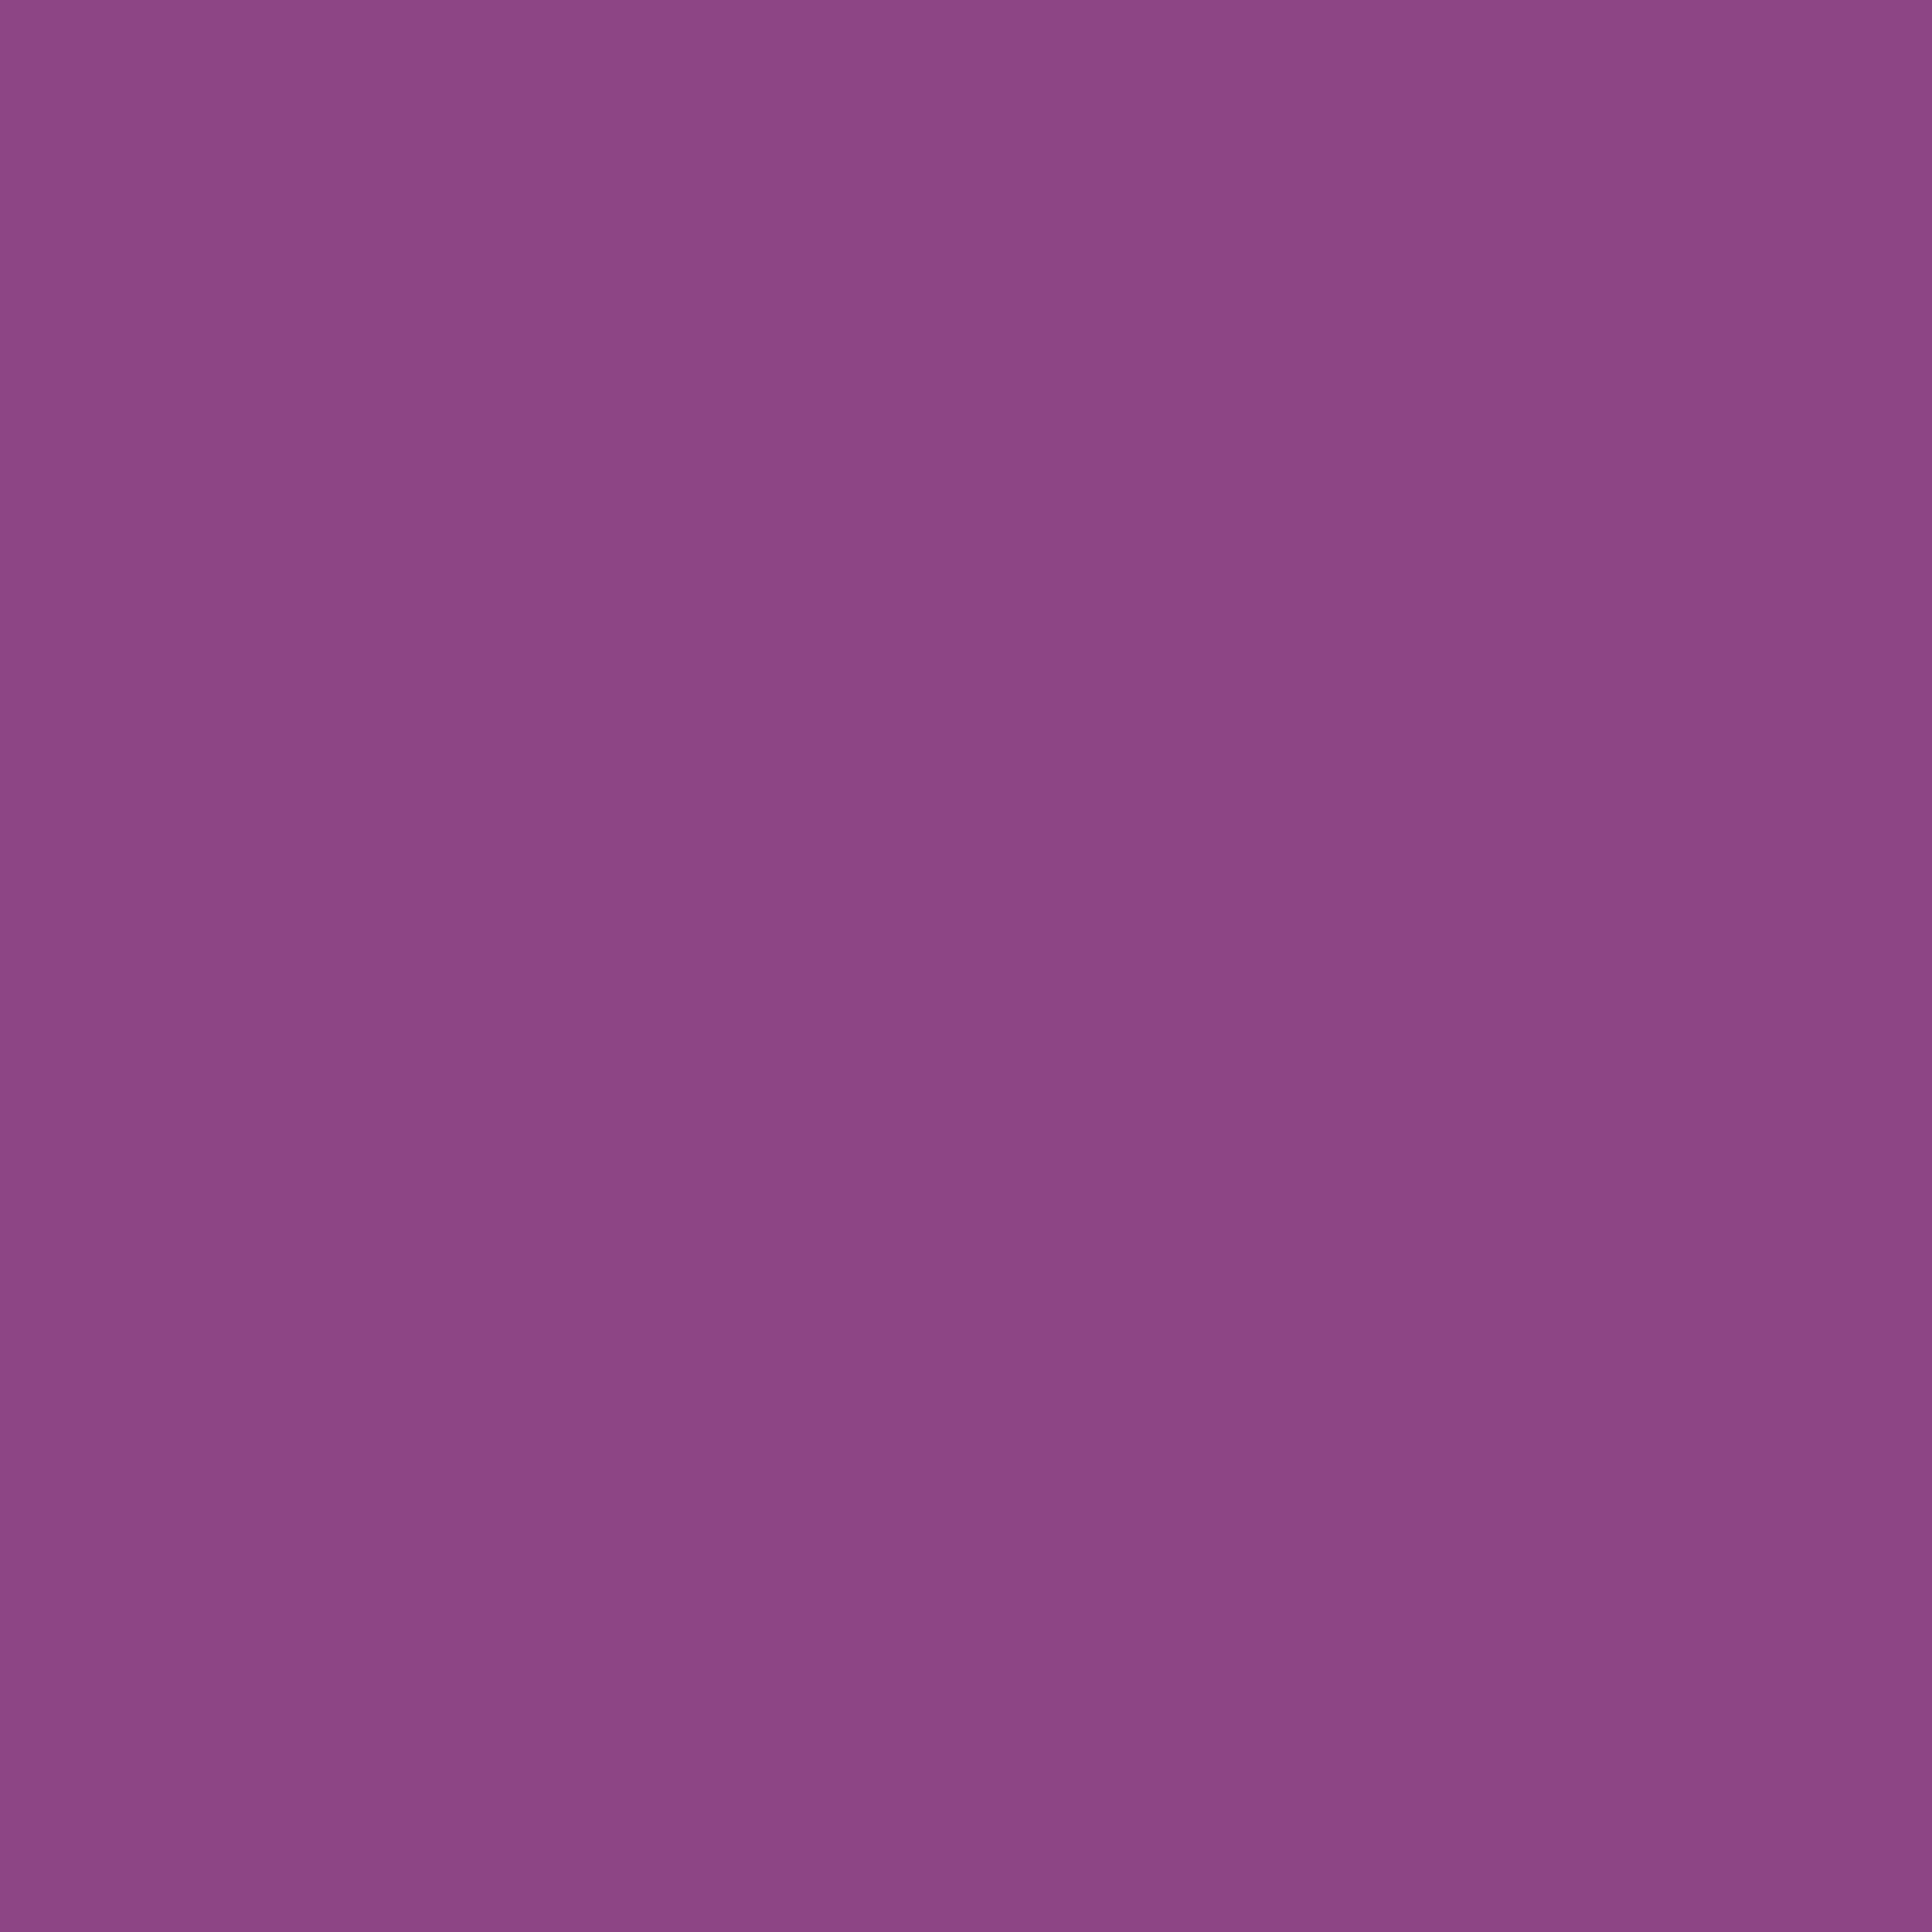 2732x2732 Plum Traditional Solid Color Background